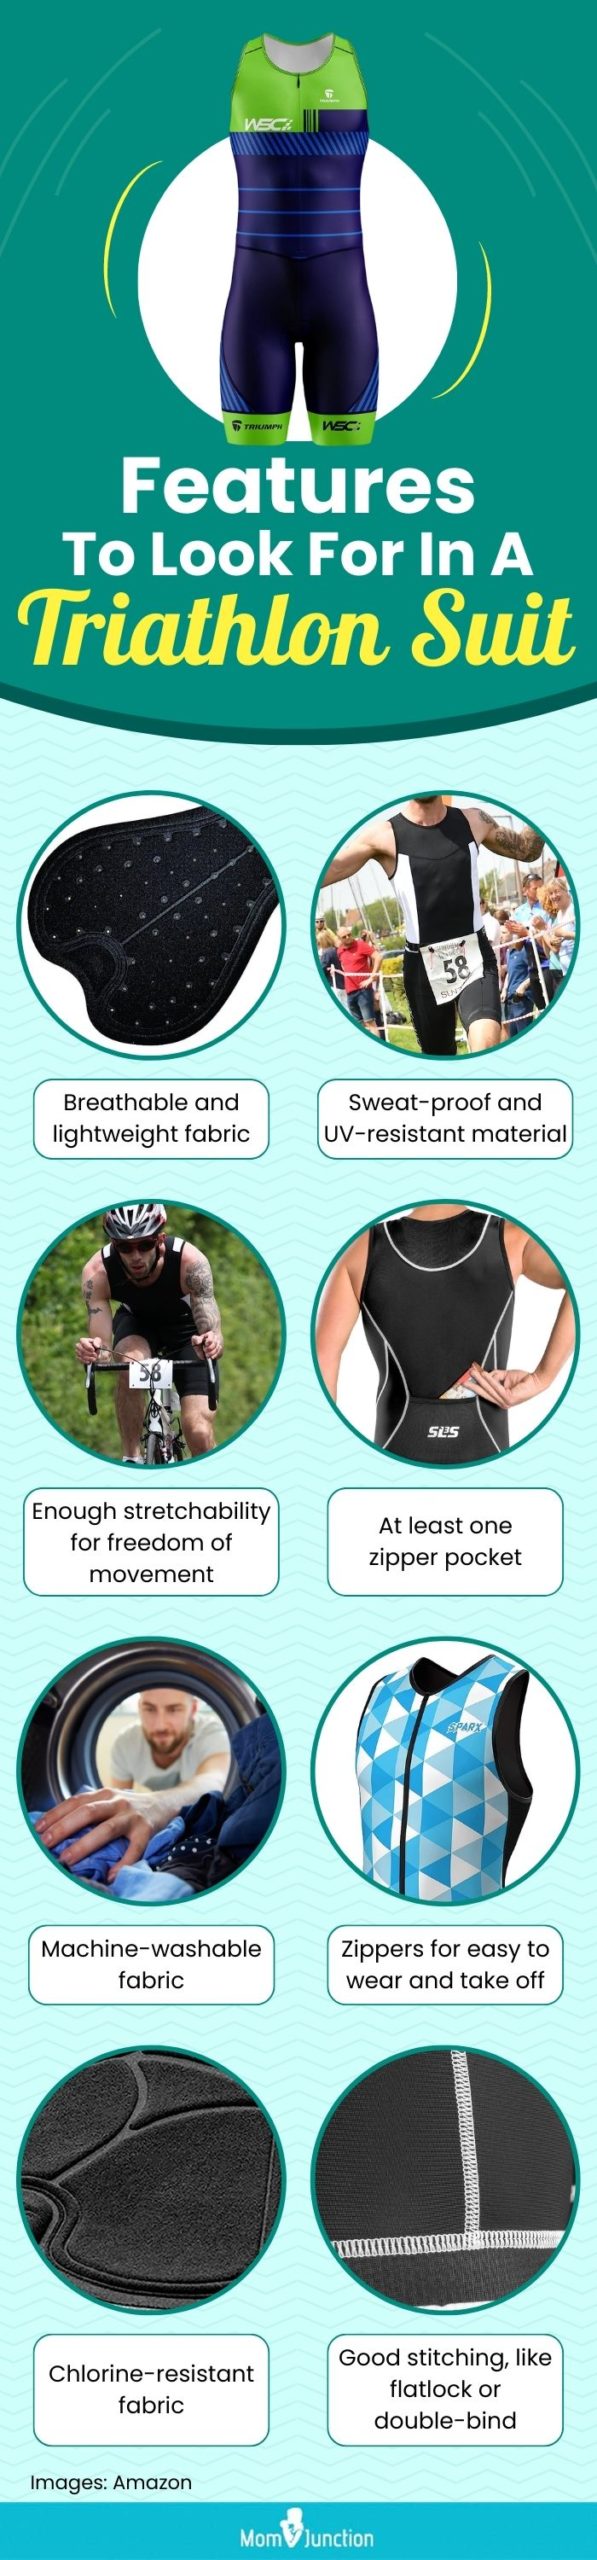 Features To Look For In A Triathlon Suit (infographic)